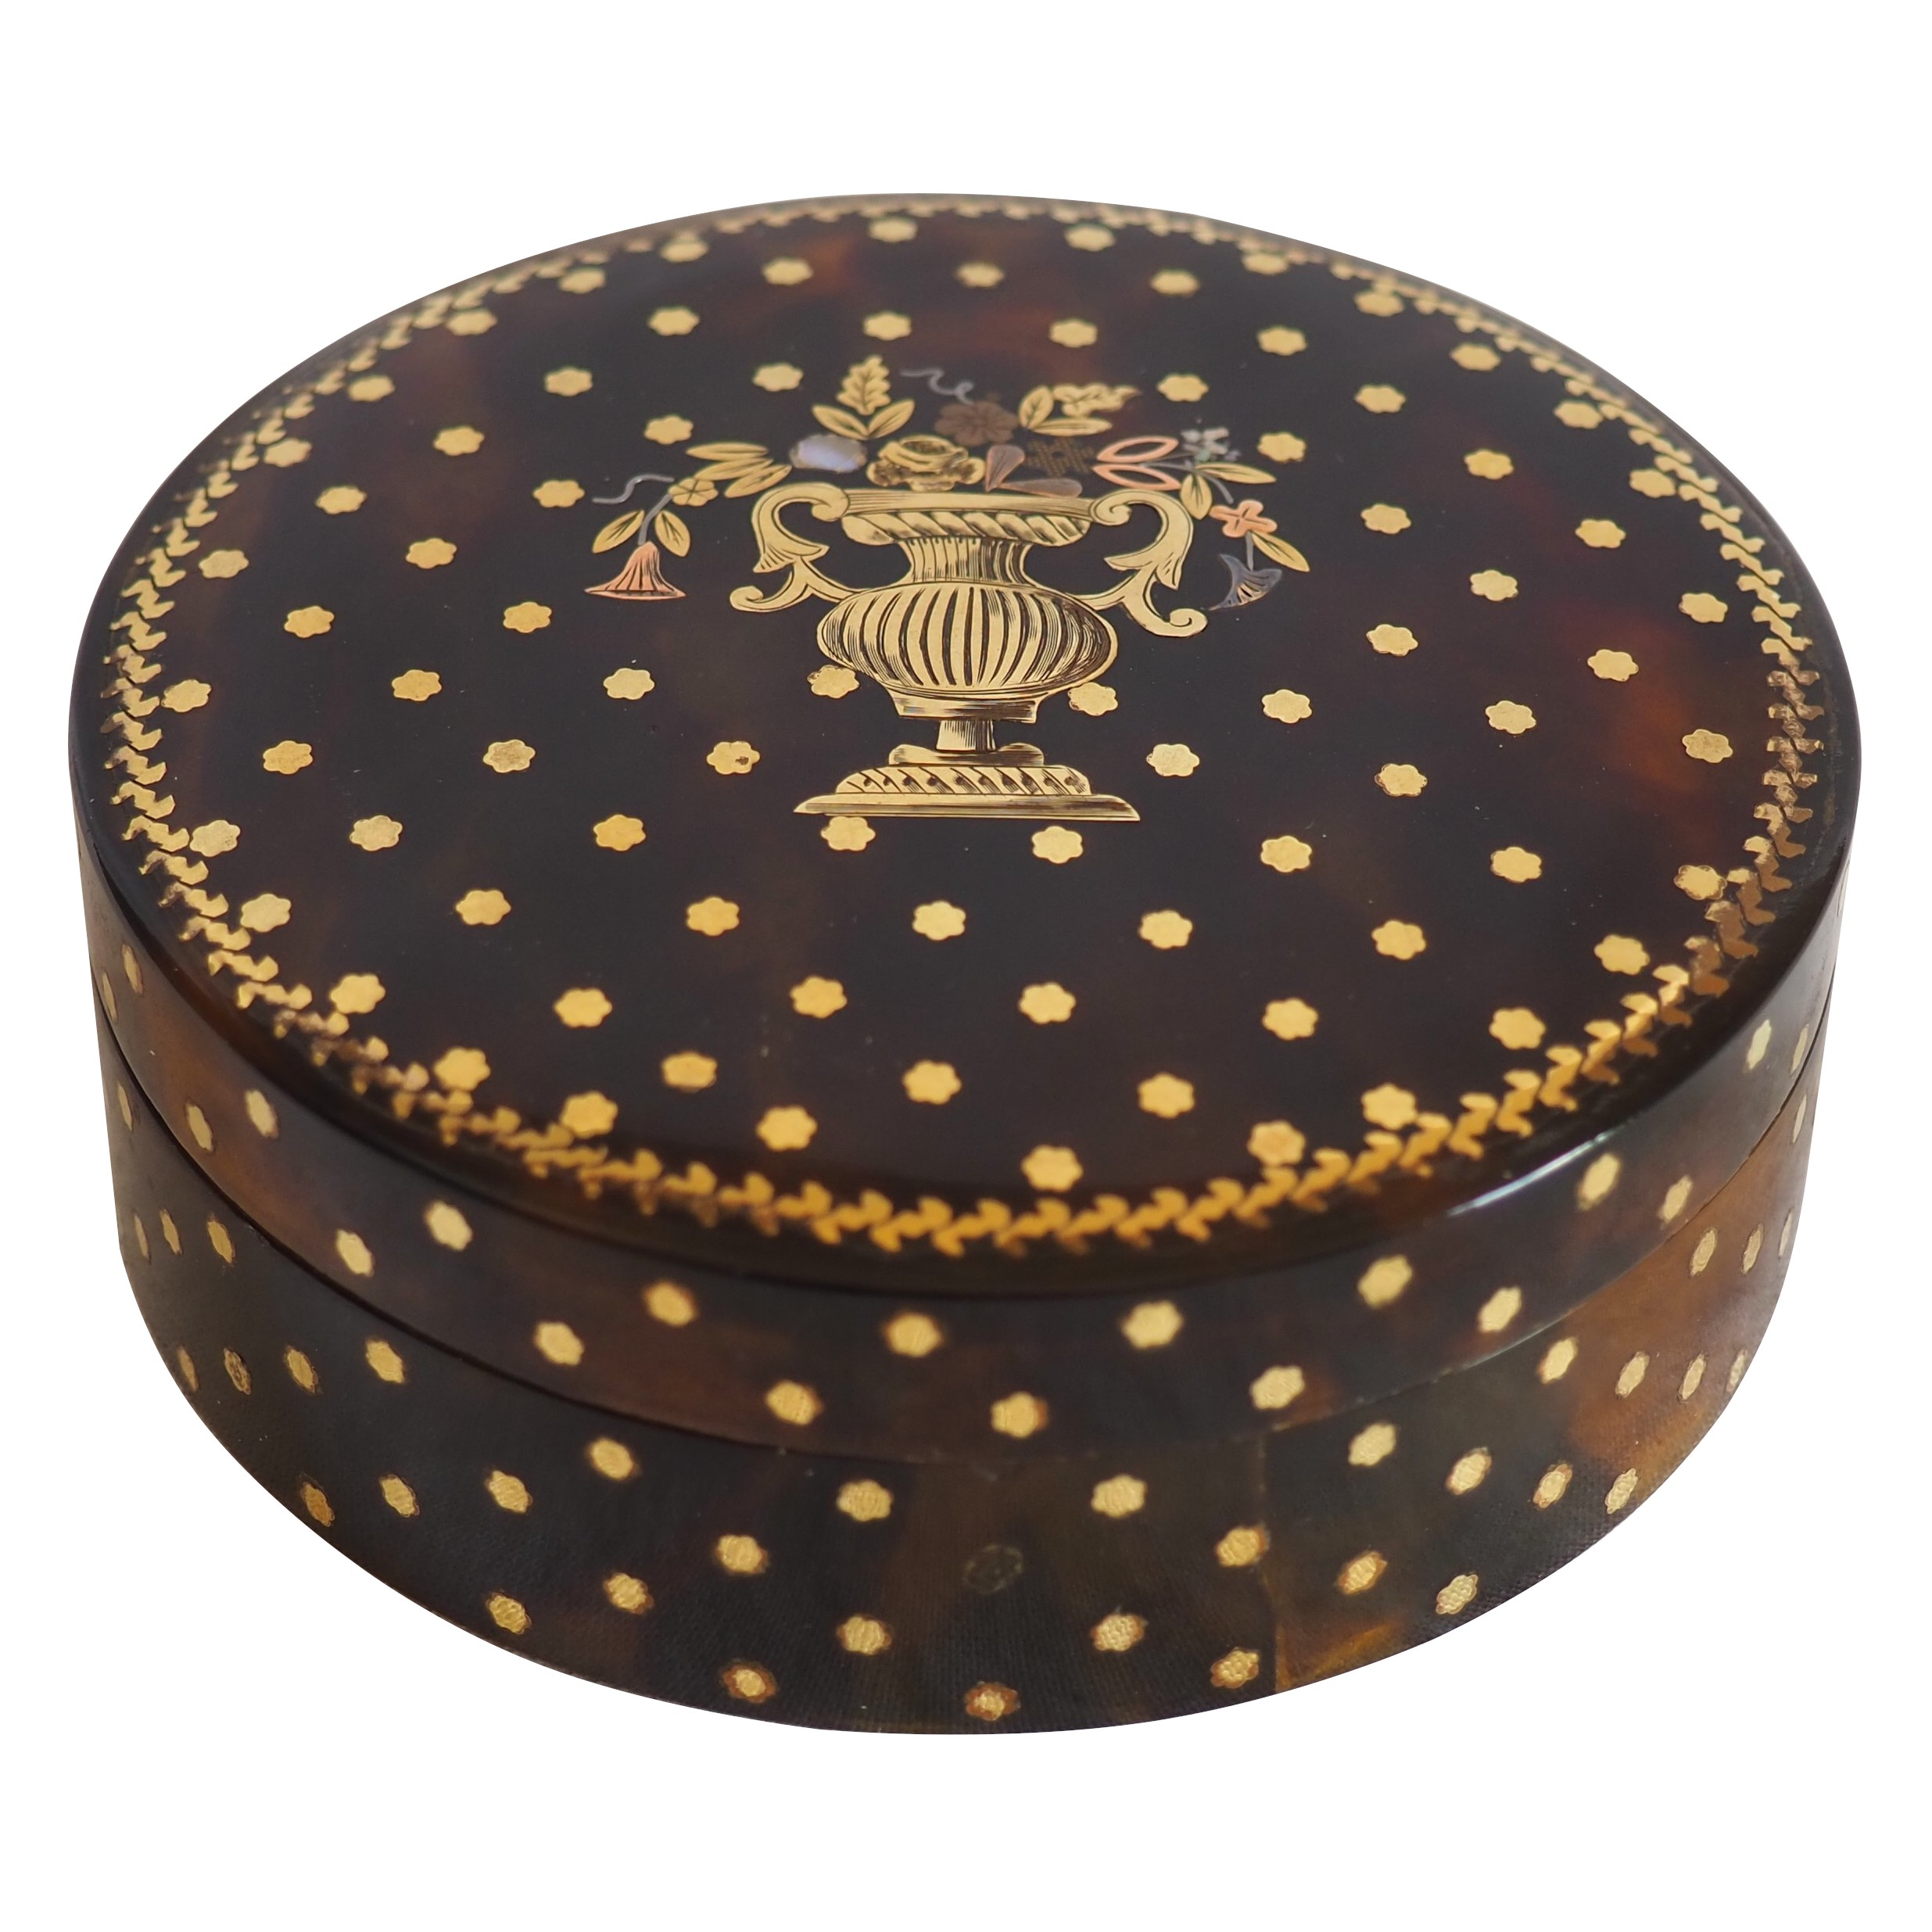 Large tortoiseshell box, gold stars inlaid, late 18th century or early 19th century